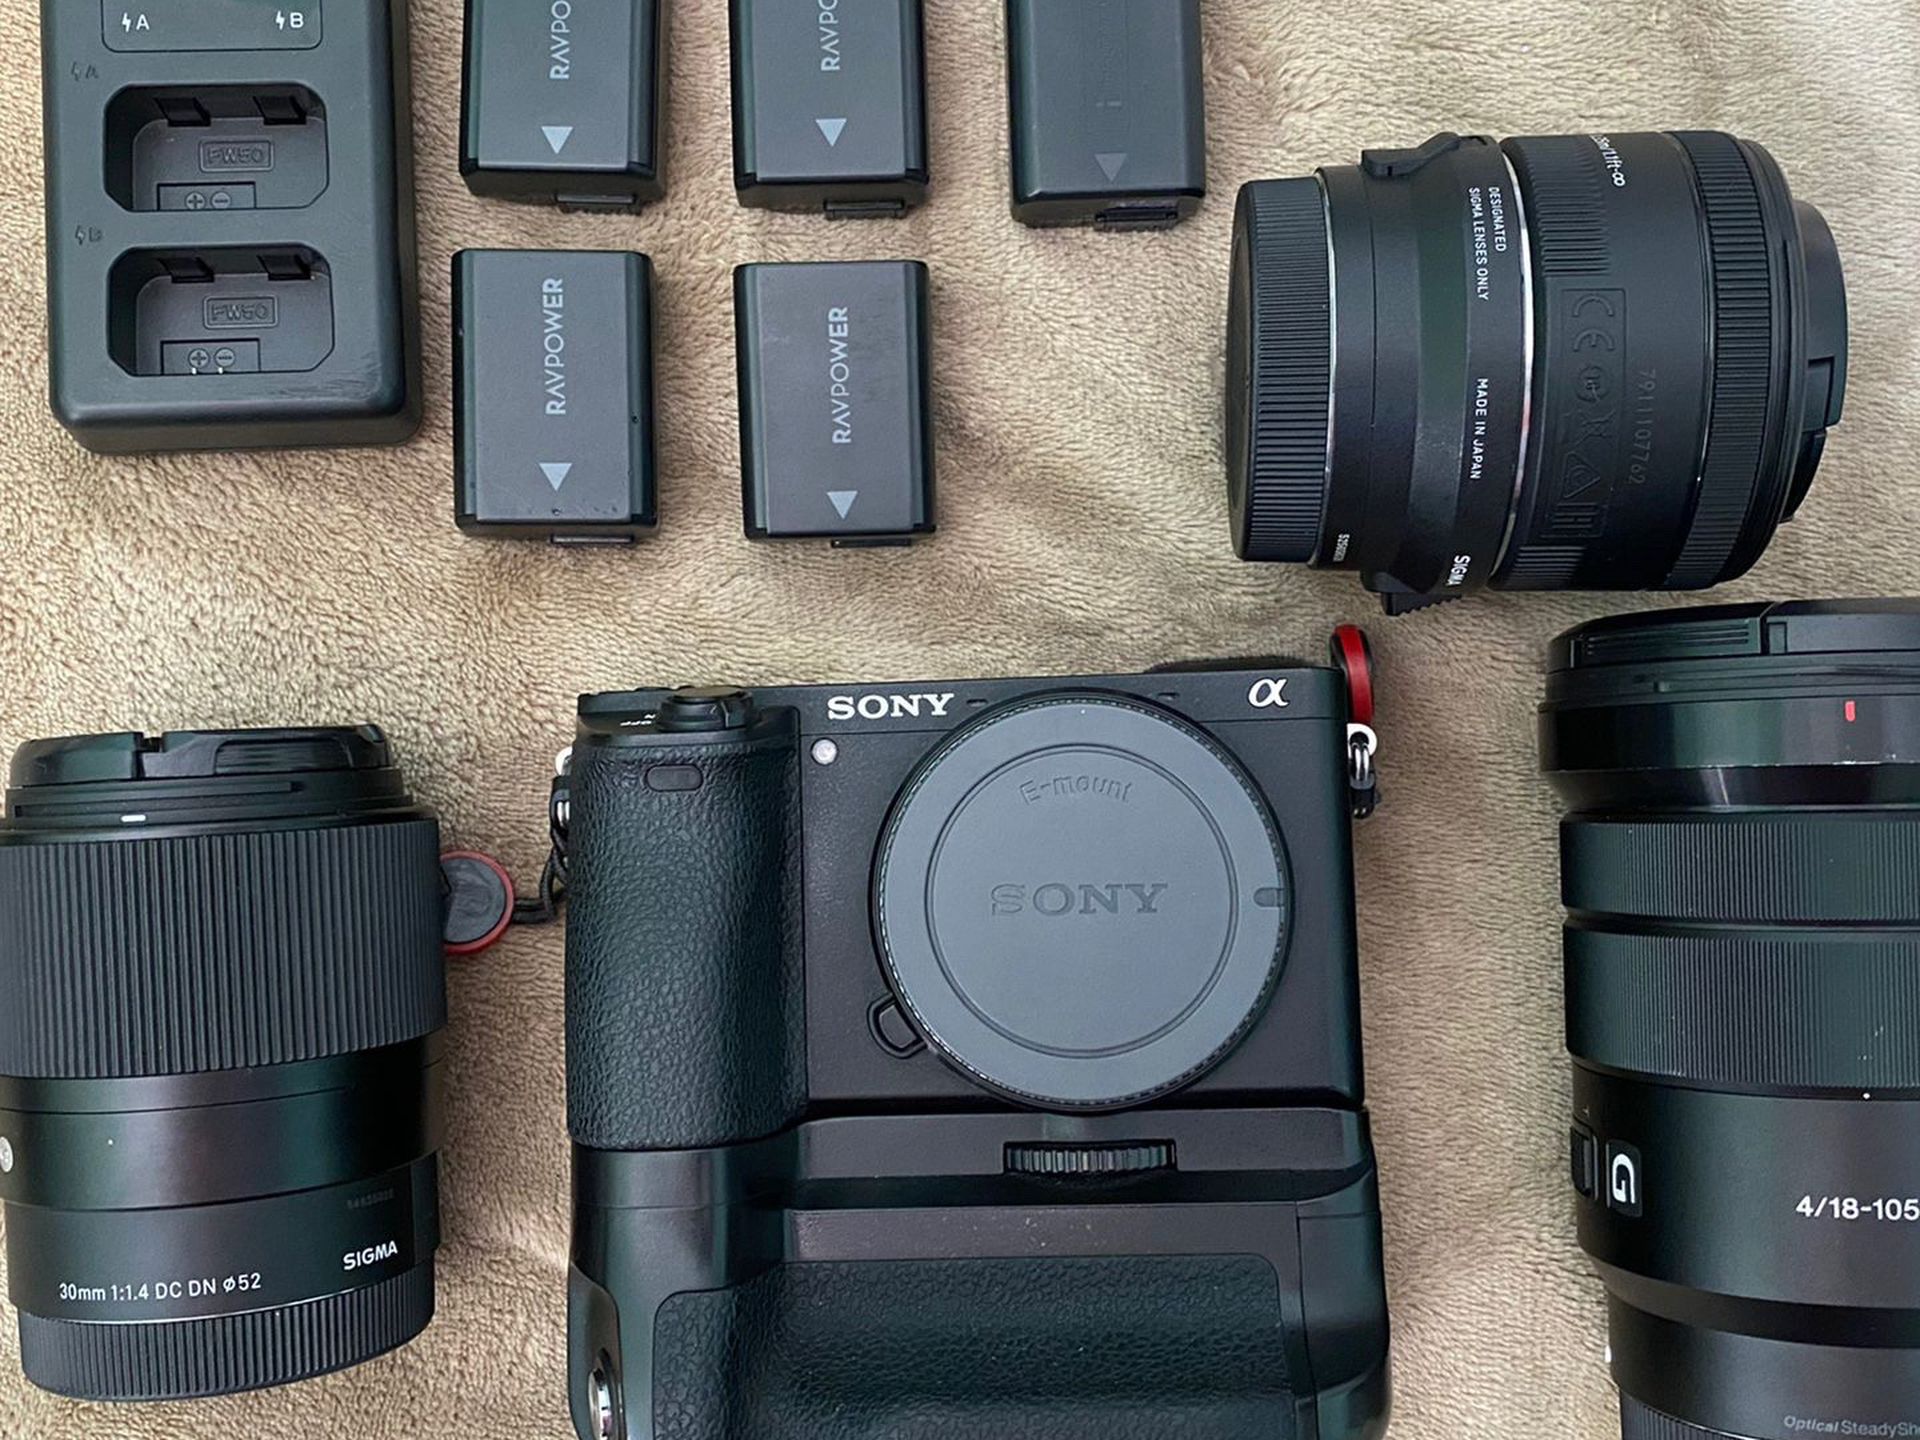 Sony A6500 With Sigma 30mm F1.4, Sony 18-105 F4, Sigma MC-11 E-EF Adapter, Canon 50mm 1.8 And Extra